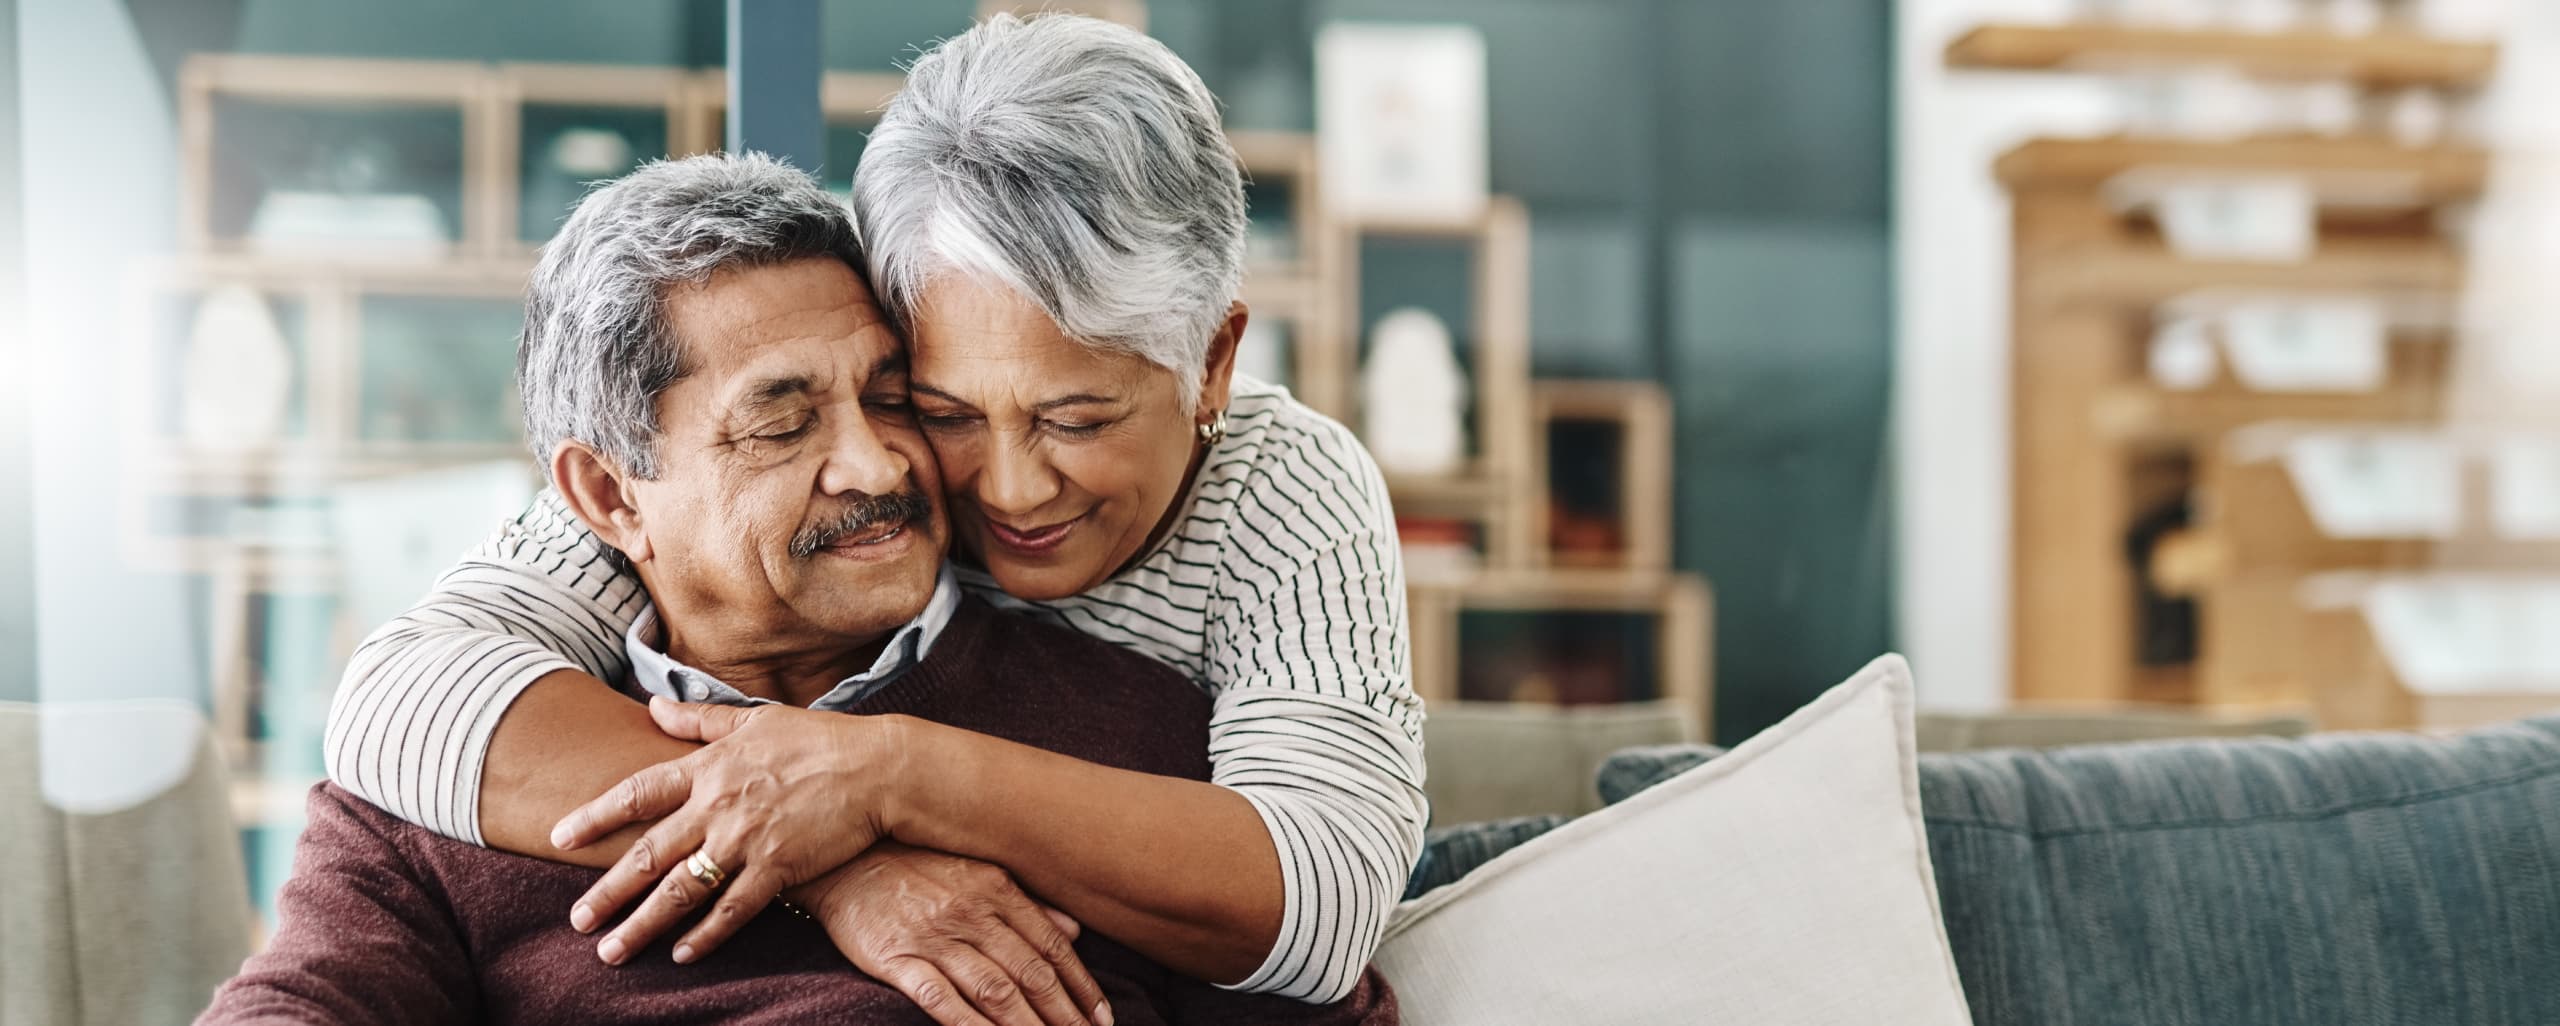 A family caregiver wrapping her arms around her spouse.